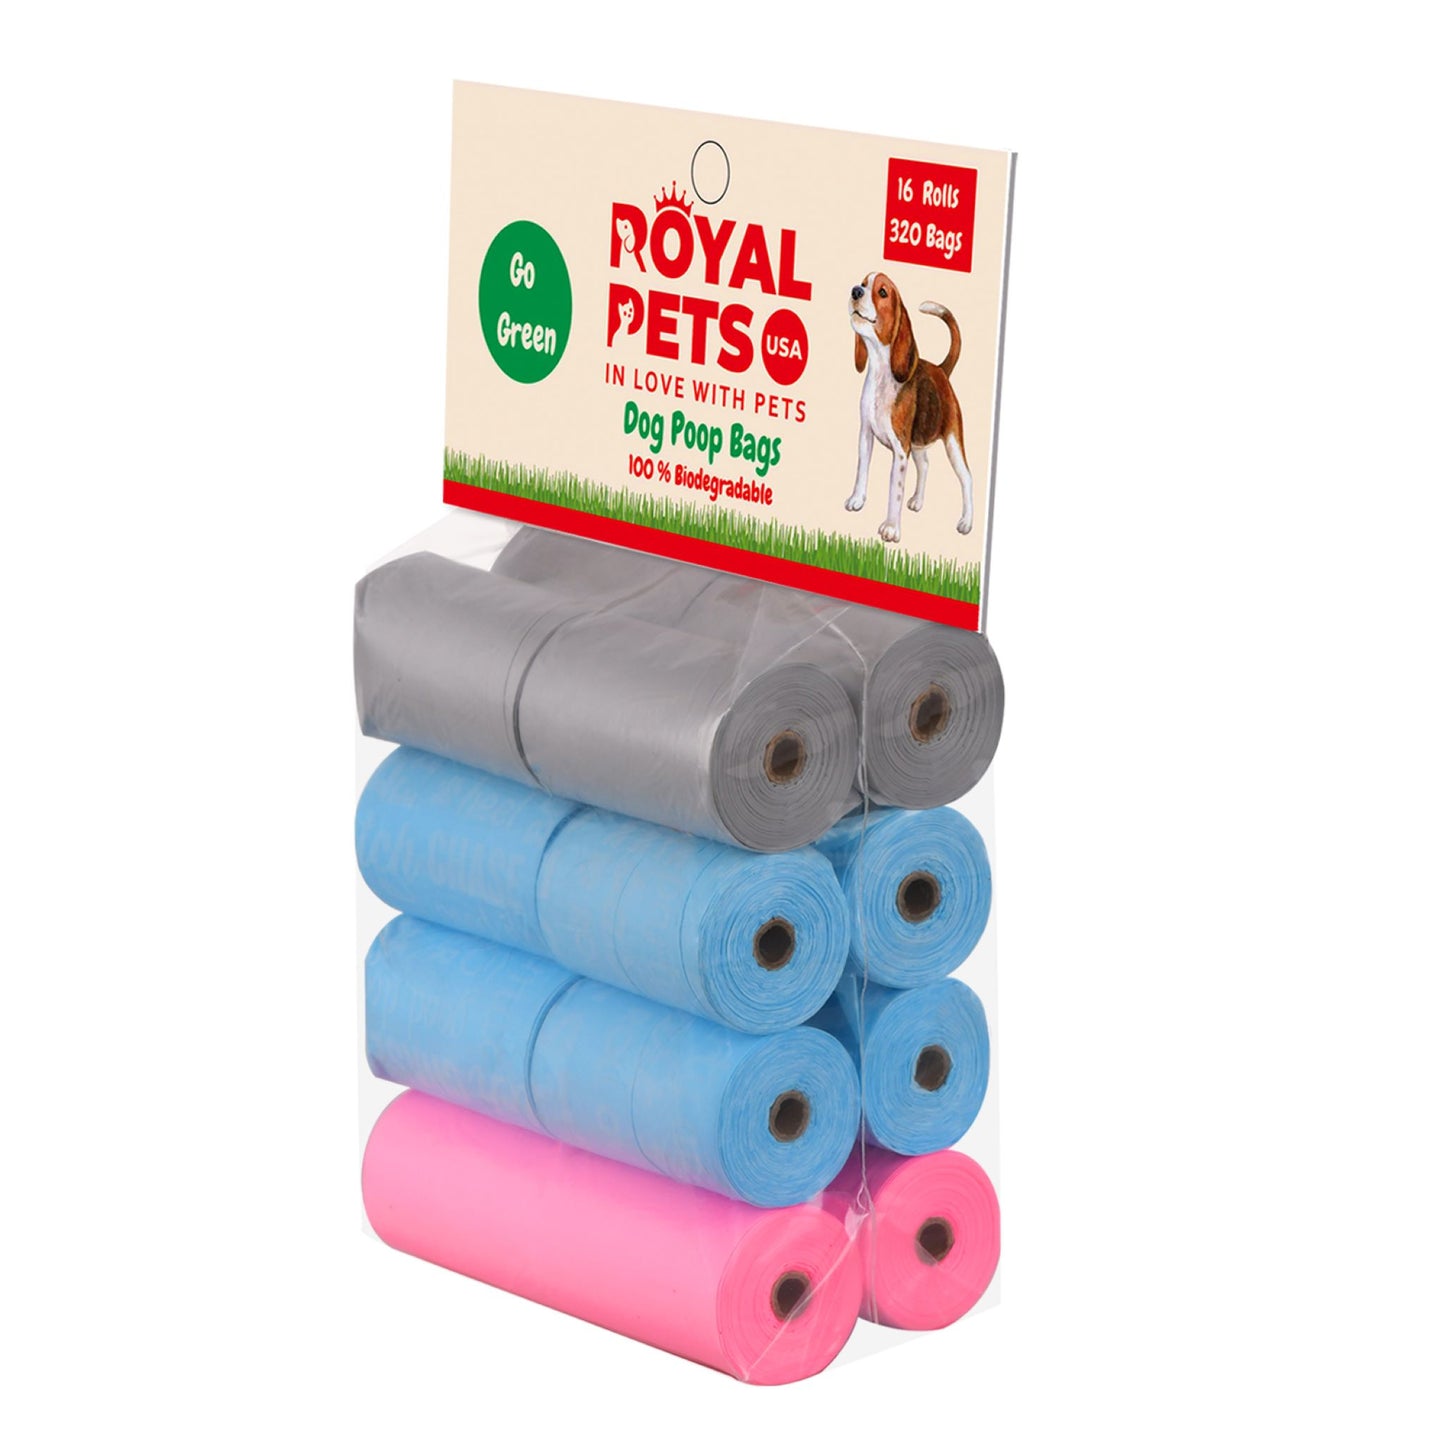 ROYAL PETS USA Poo Bags Eco-Friendly and Reliable. Made from 100% Biodegradable - SAVE EARTH, which Decompose Naturally, Minimizing Pollution. Heavy Duty & Tear Resistant - No more Landfills - ASTM D6400 & EN 13432 CERTIFIED